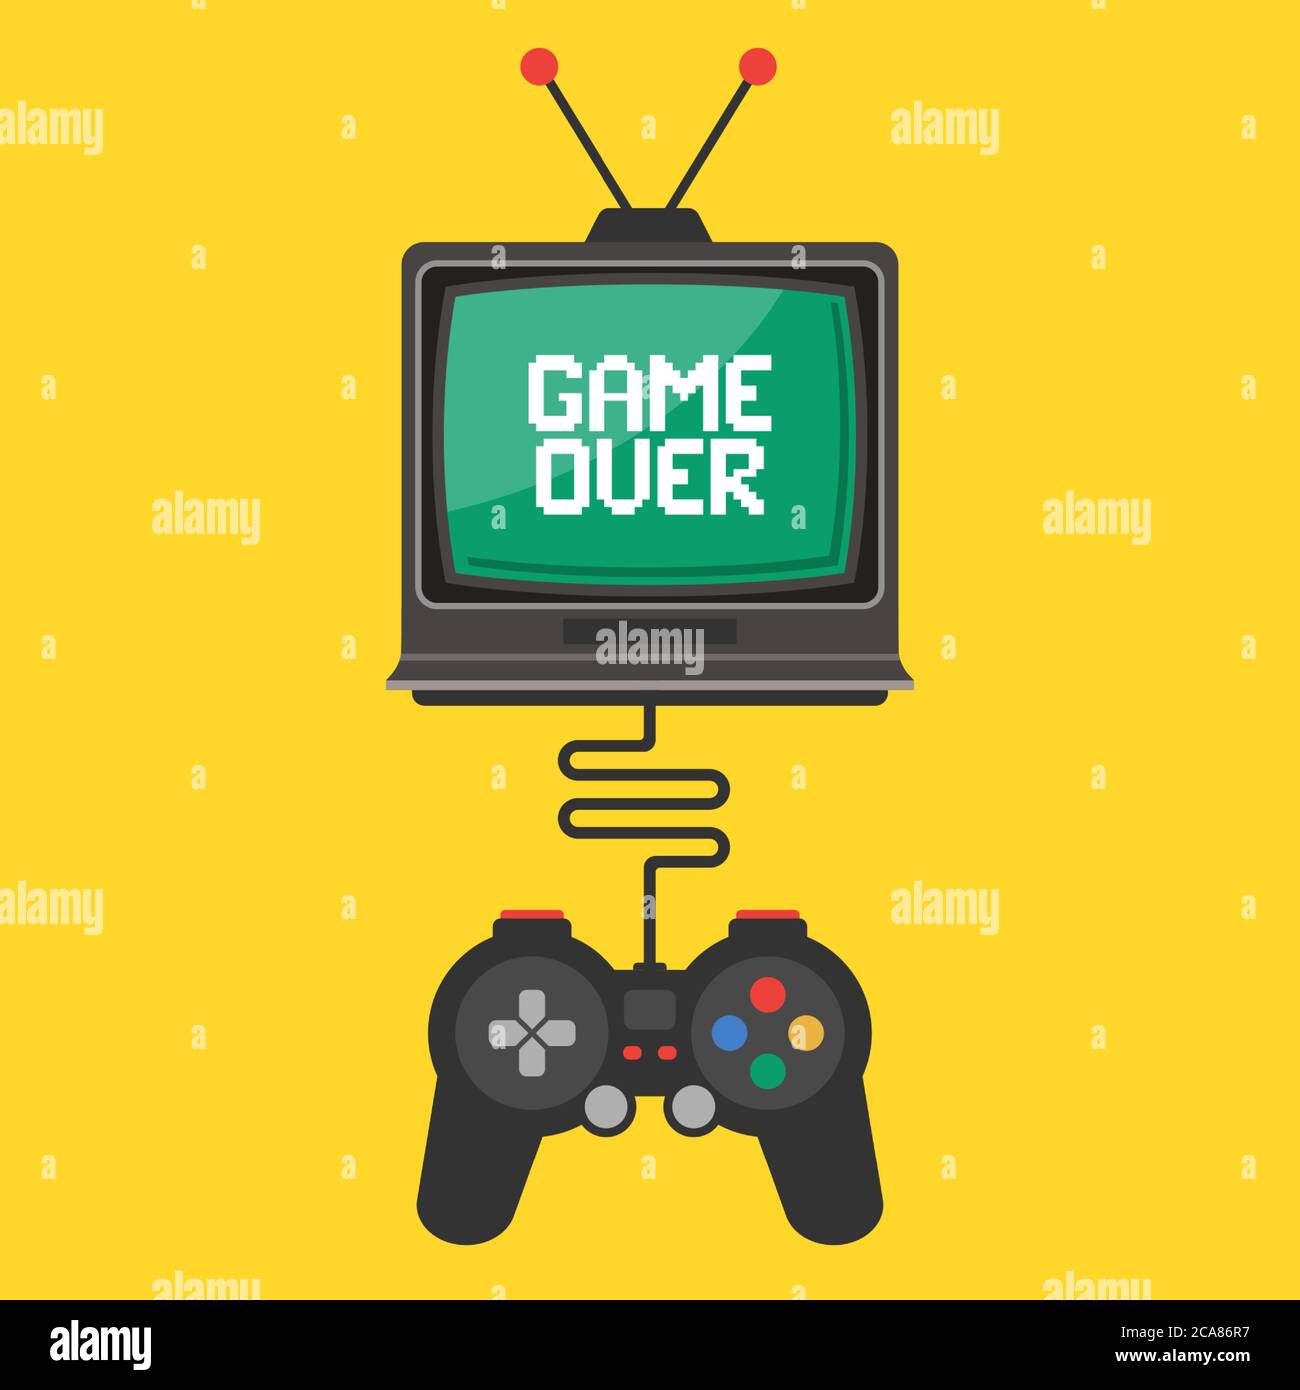 joystick control in a video game on an old TV. inscription game over on the screen. flat vector illustration Stock Vector